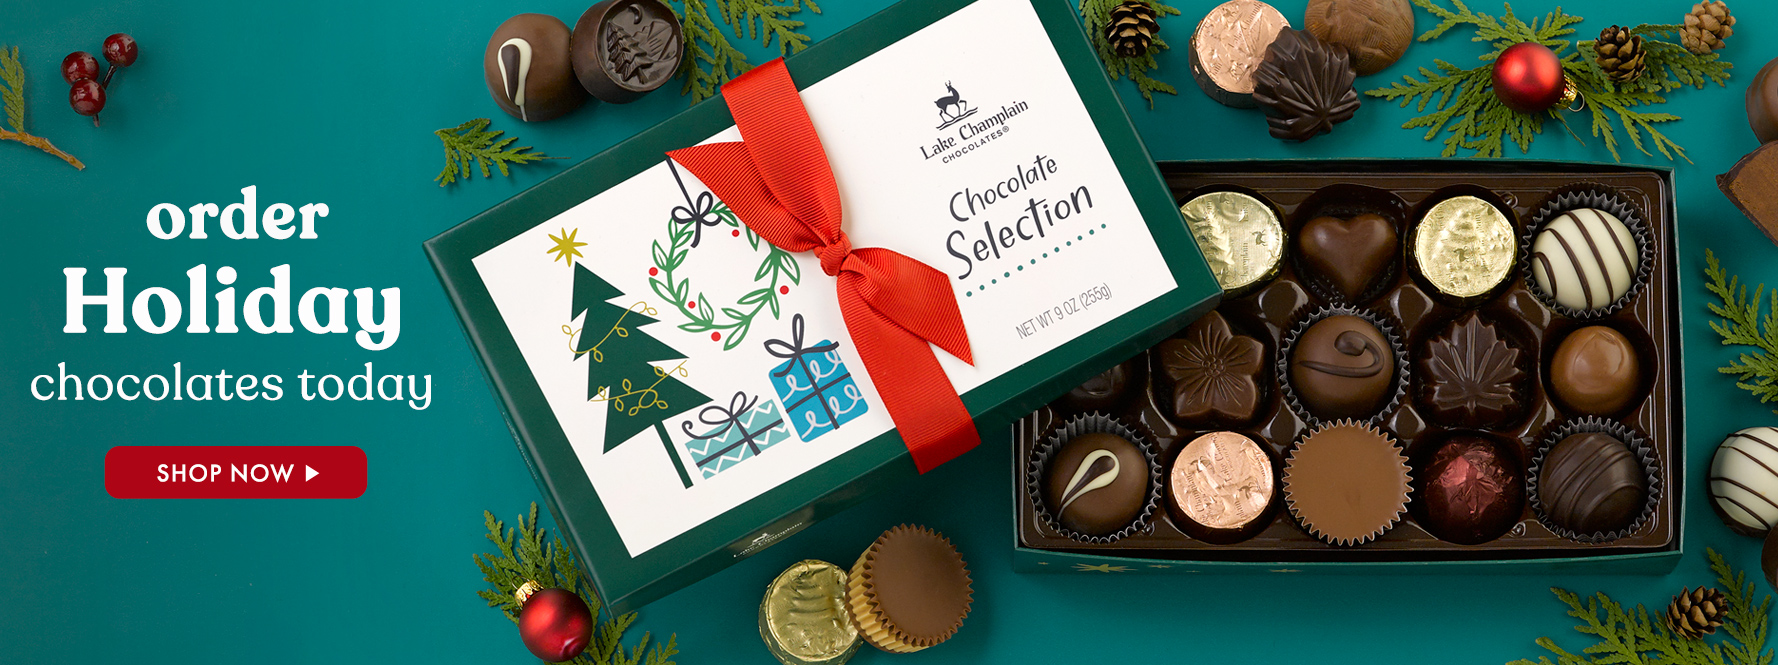 Pre-order Holiday Chocolates now